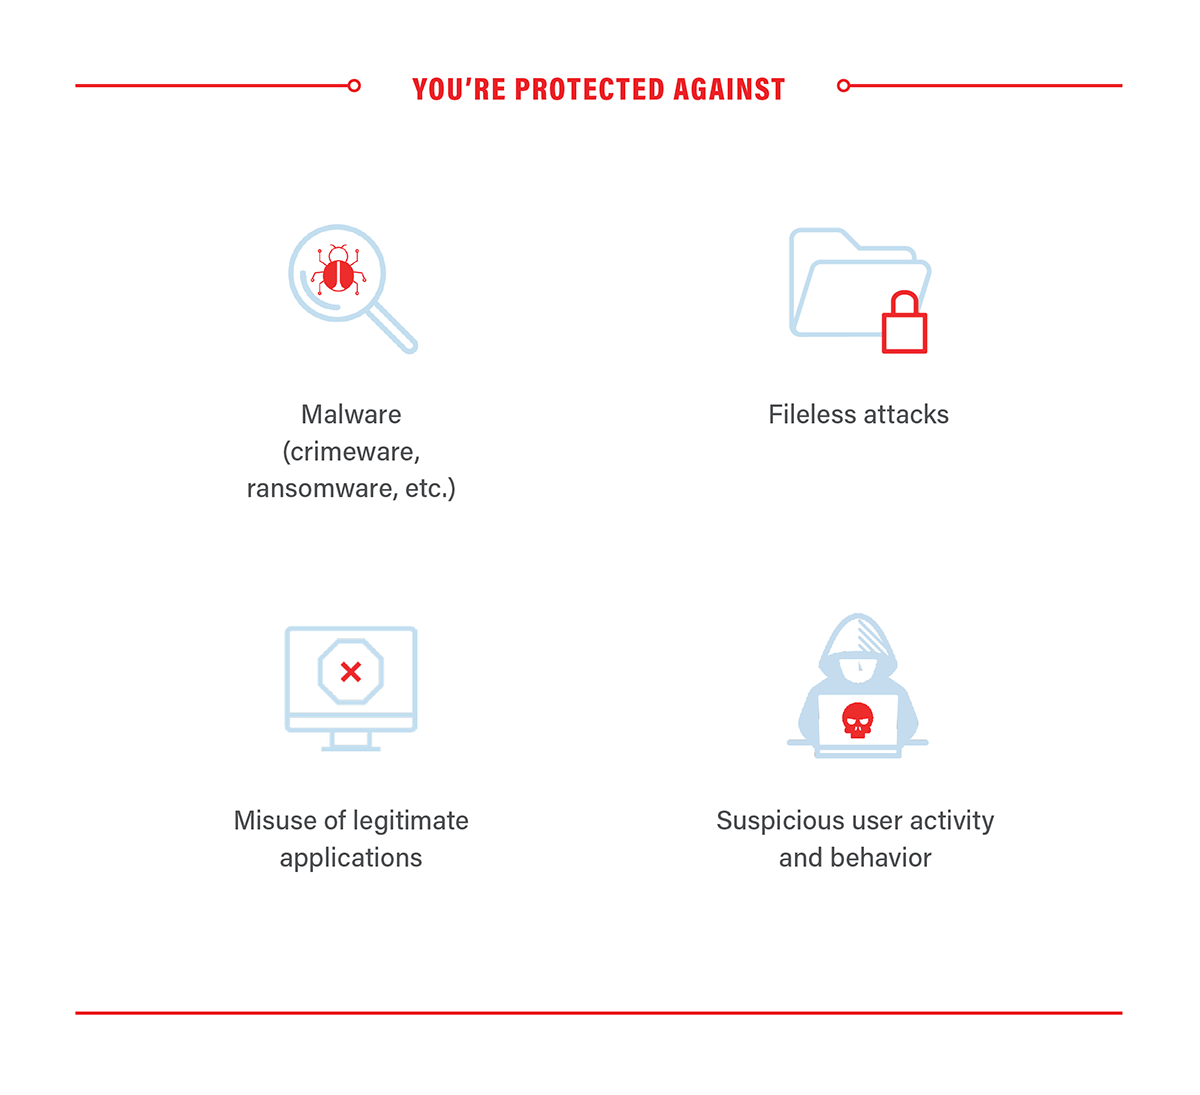 EDR protects you against malware, fileless attacks, misuse of apps, and suspicious user activity